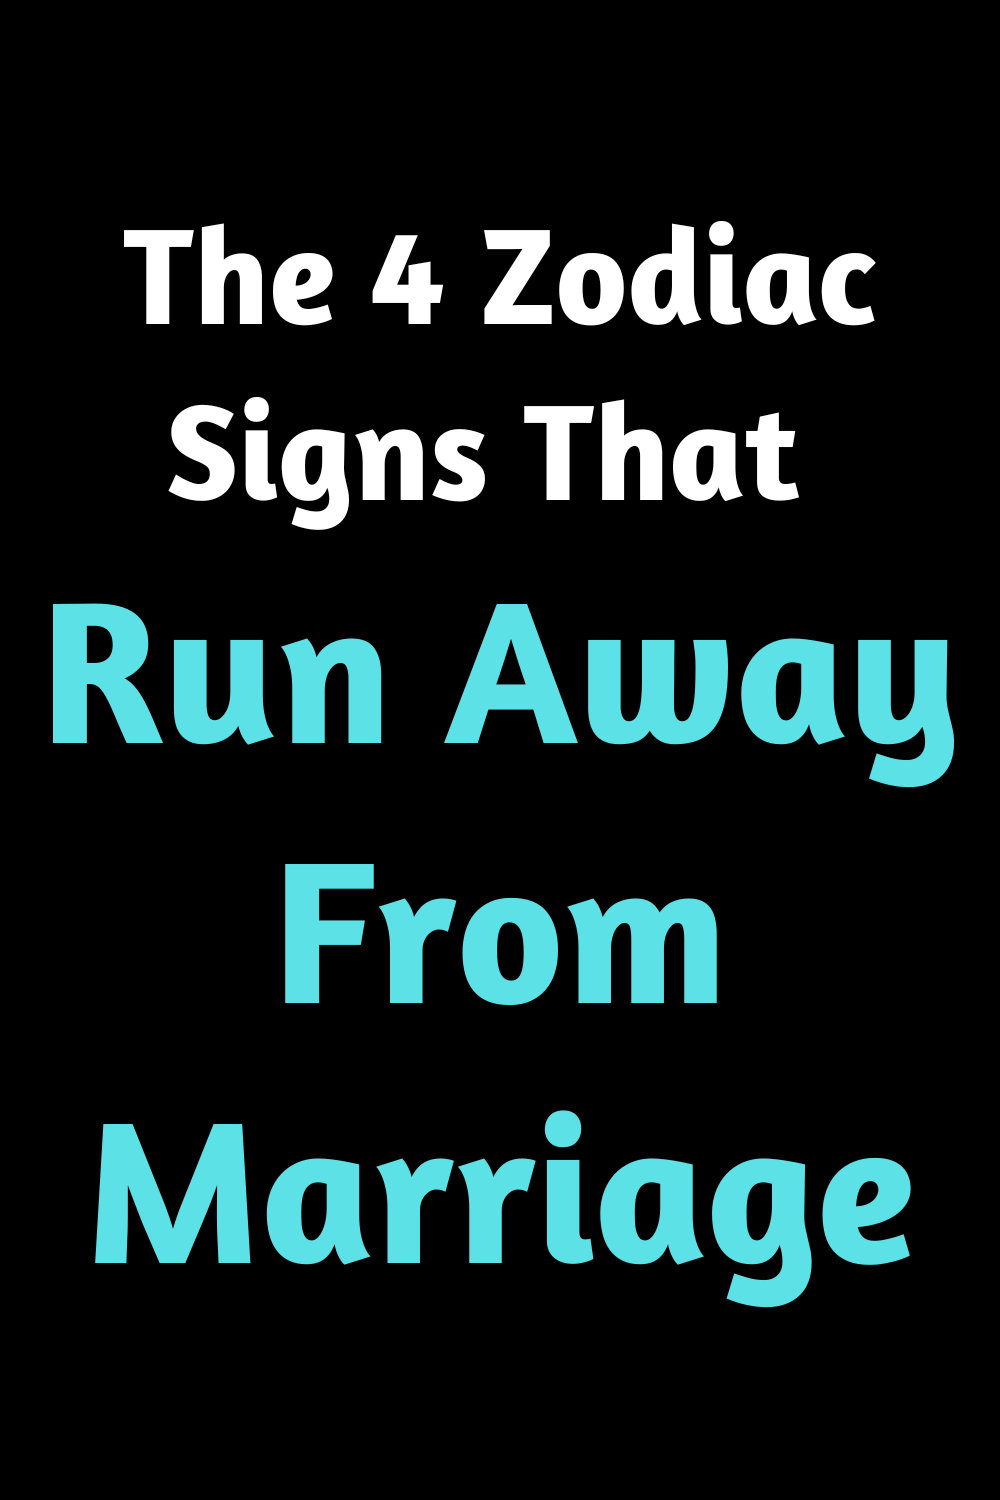 The 4 Zodiac Signs That Run Away From Marriage